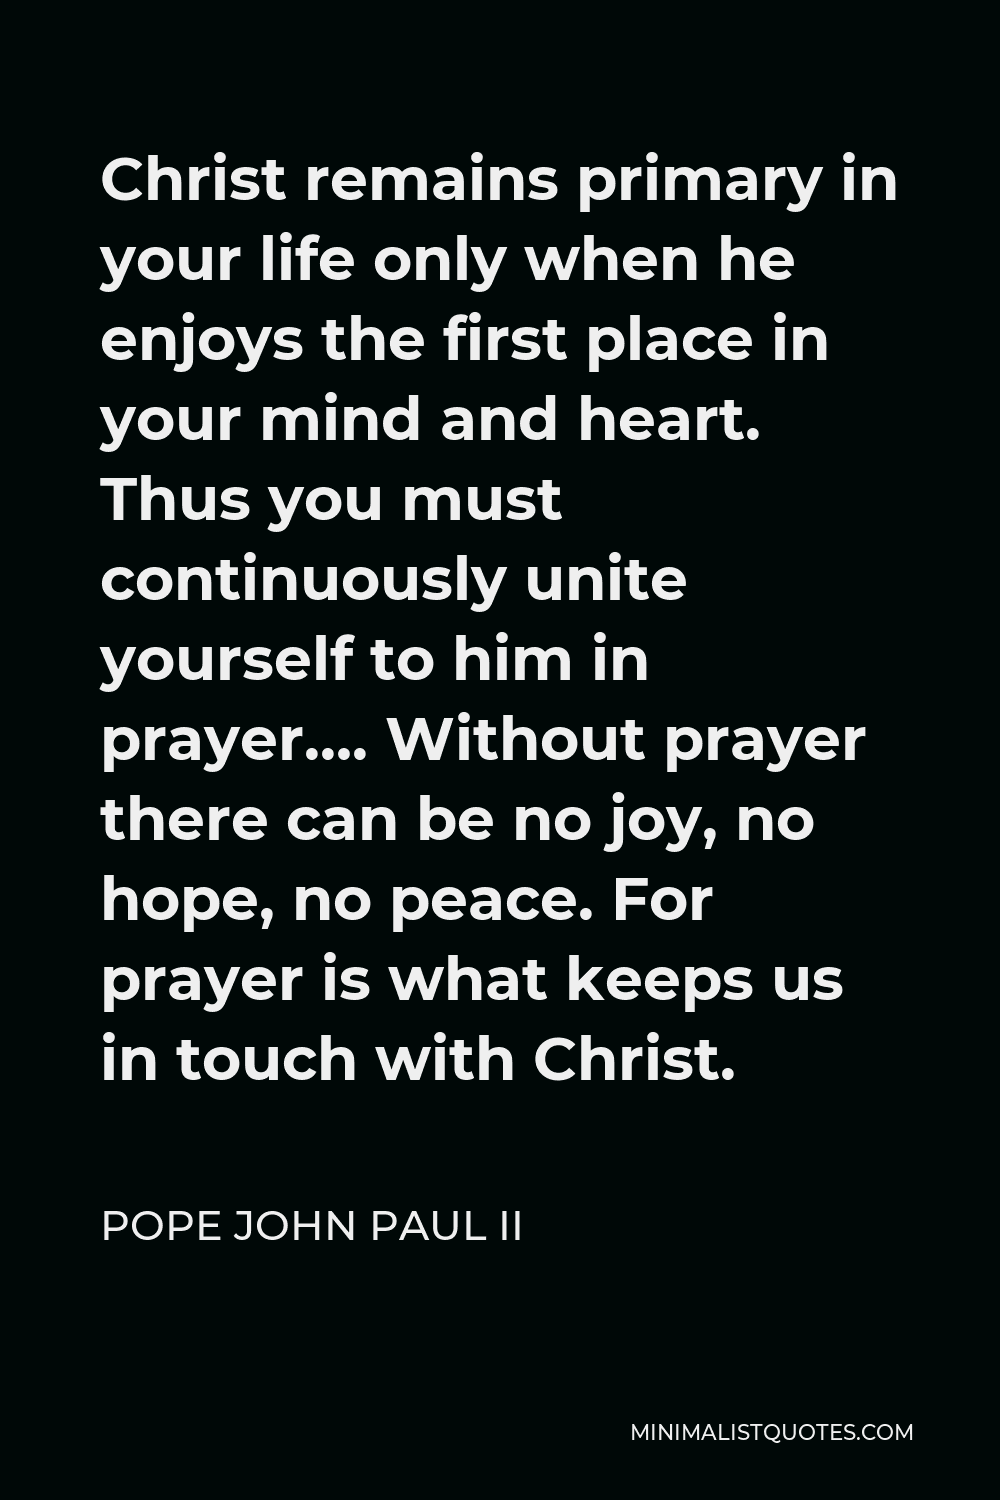 Pope John Paul II Quote - Christ remains primary in your life only when he enjoys the first place in your mind and heart. Thus you must continuously unite yourself to him in prayer…. Without prayer there can be no joy, no hope, no peace. For prayer is what keeps us in touch with Christ.